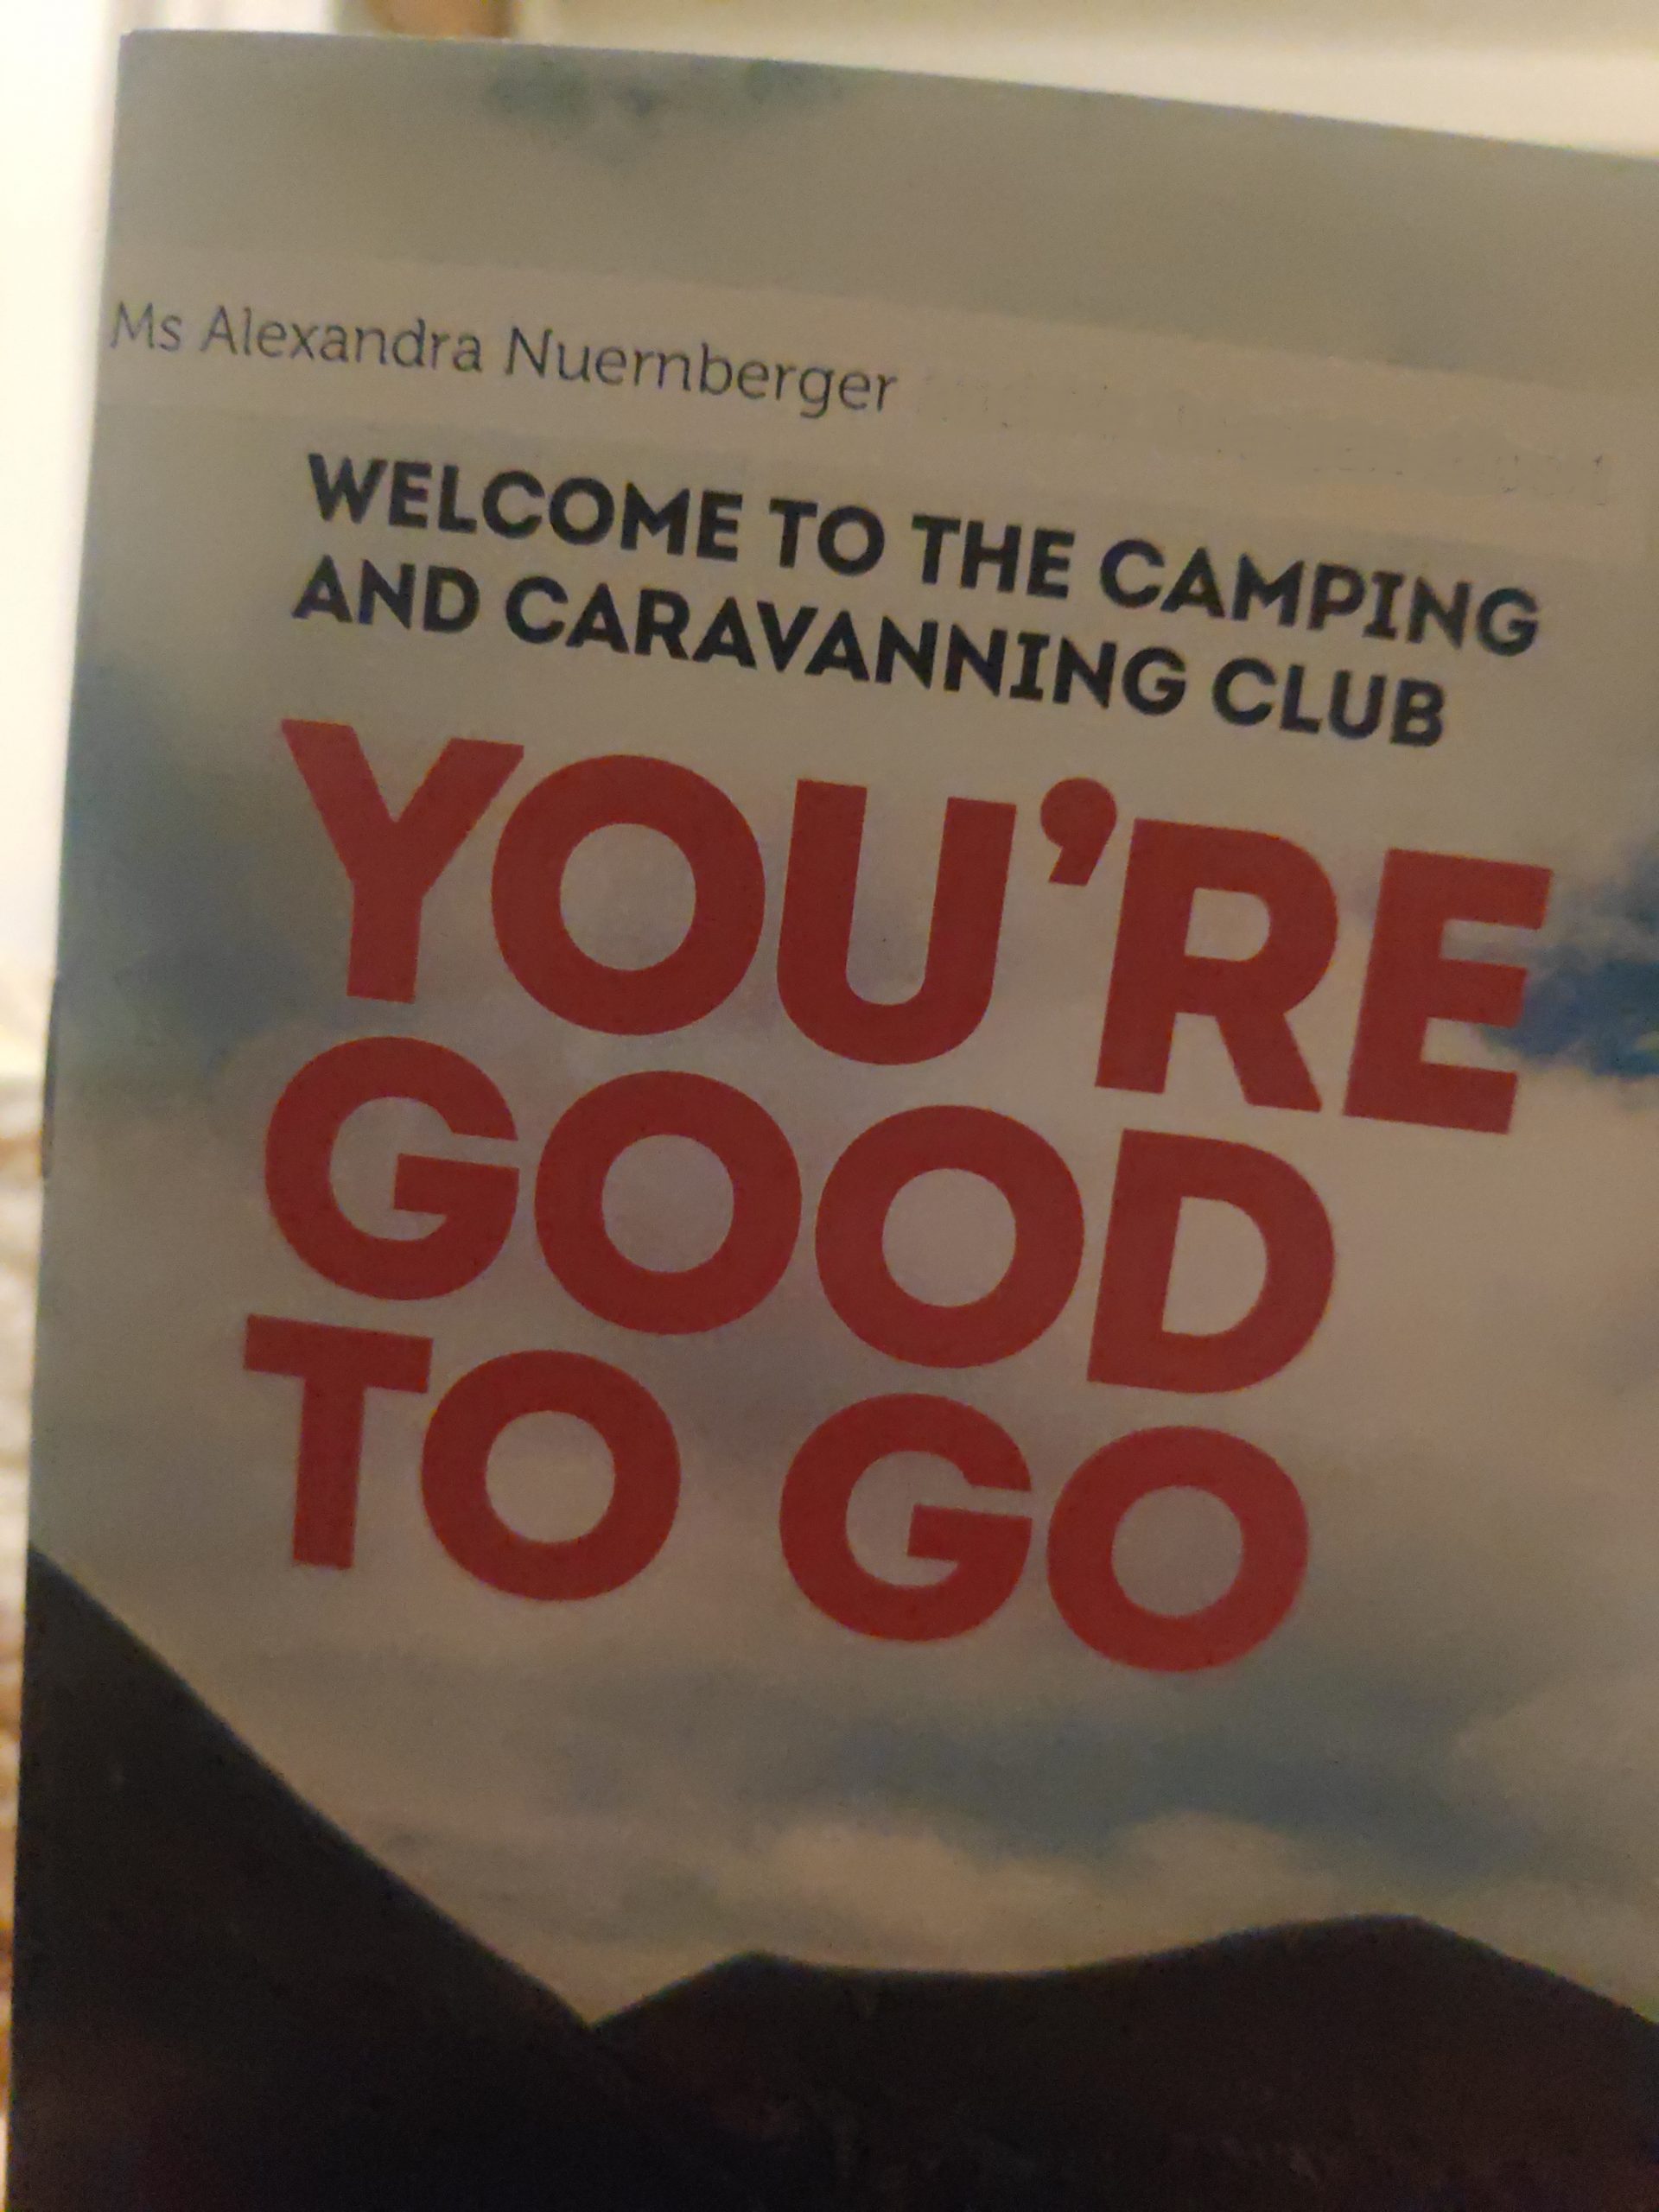 You are good to go. Broschüre des Camping and Caravaning Club